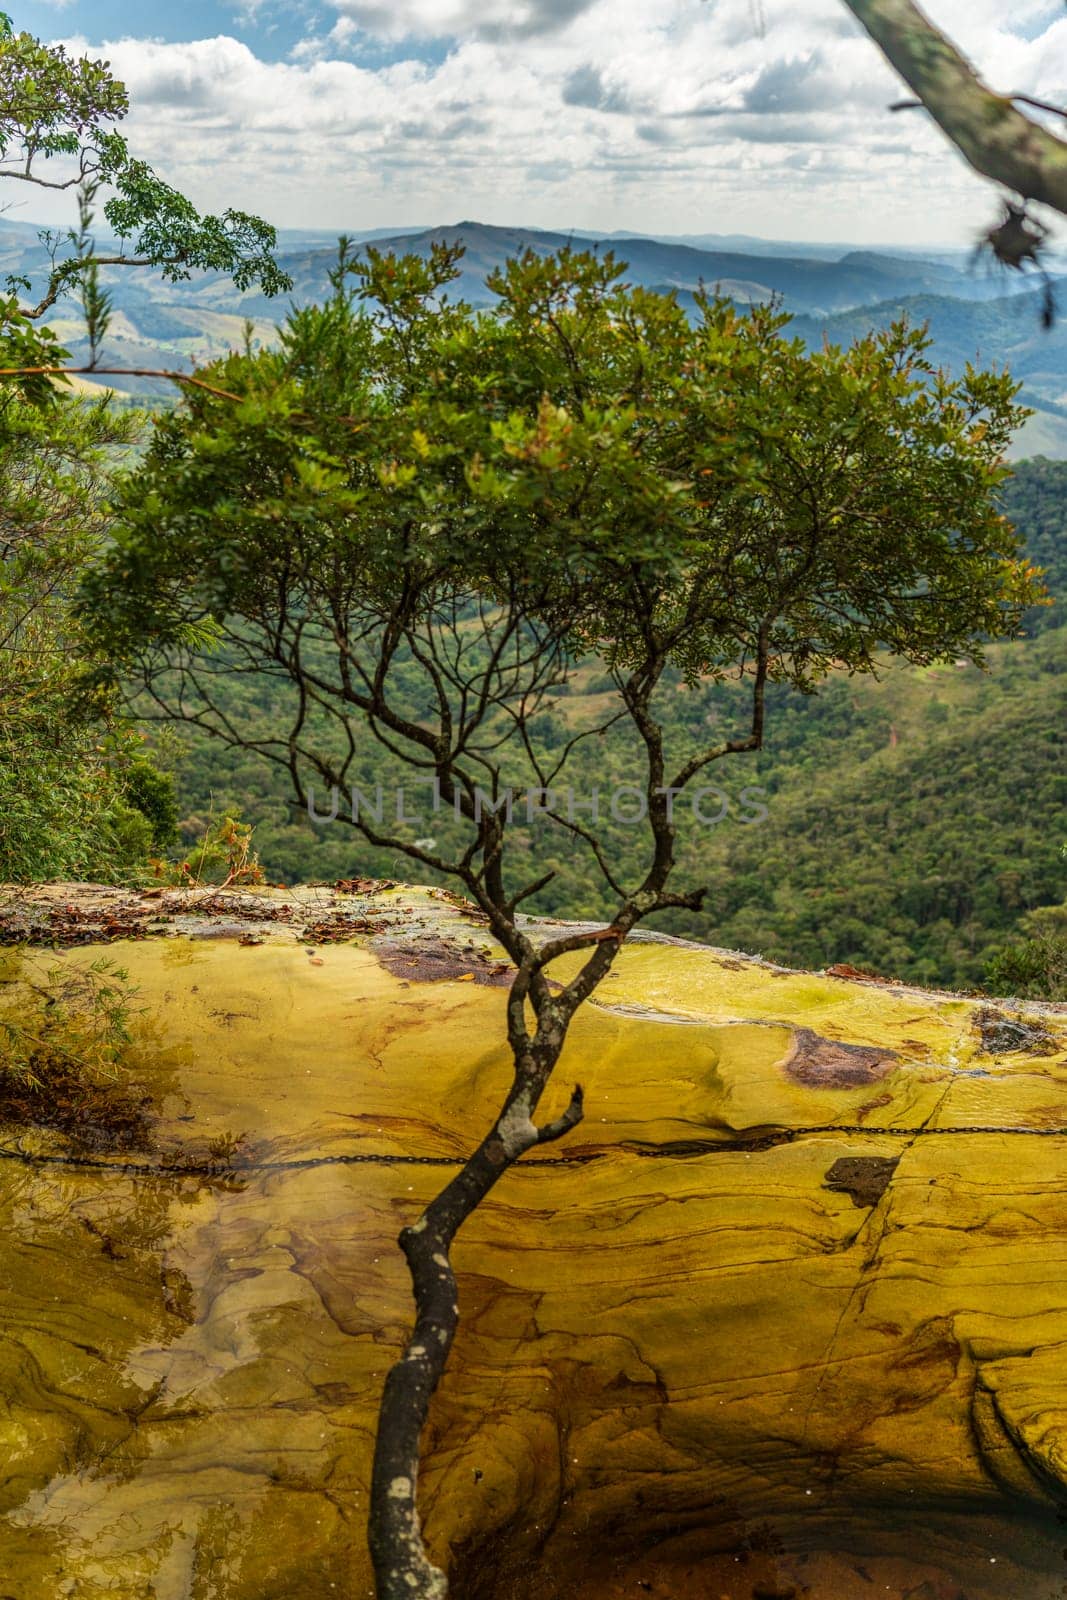 A sturdy tree thrives on a cliff, facing a wide forested valley.